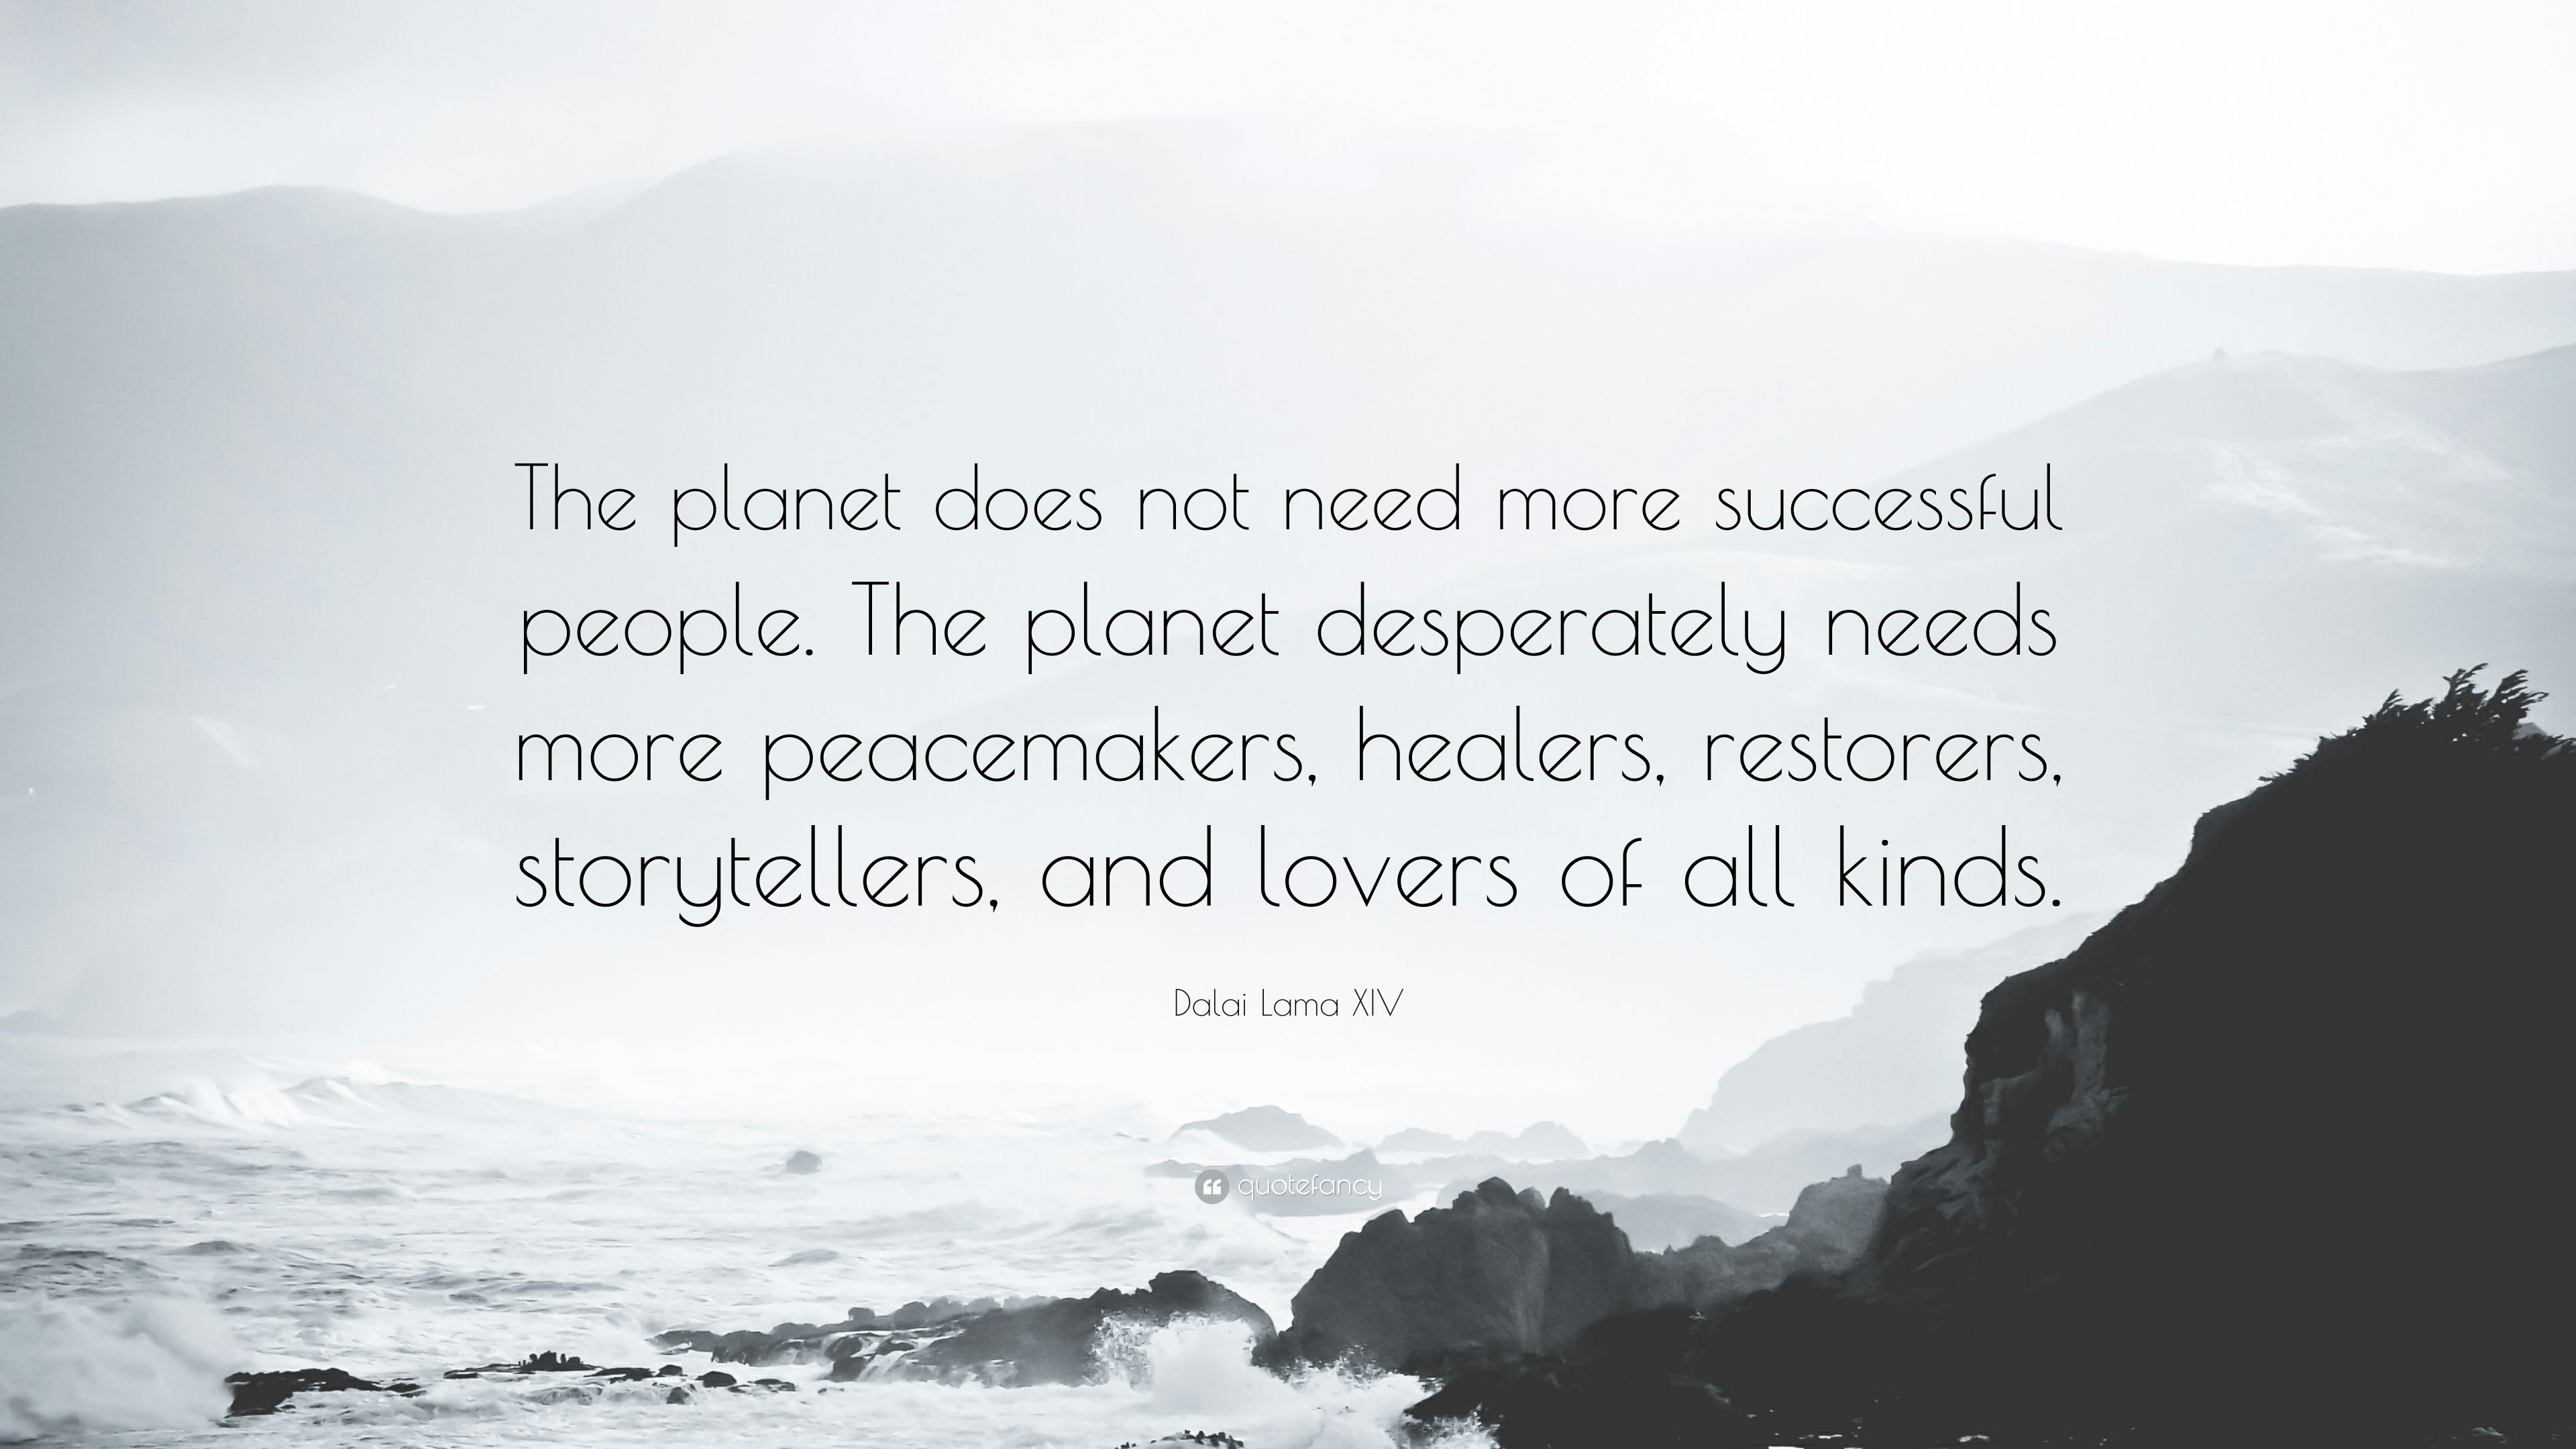 Dalai Lama XIV Quote: “The planet does not need more successful people. The planet desperately needs more peacemakers, healers, restorers, stor.” (12 wallpaper)